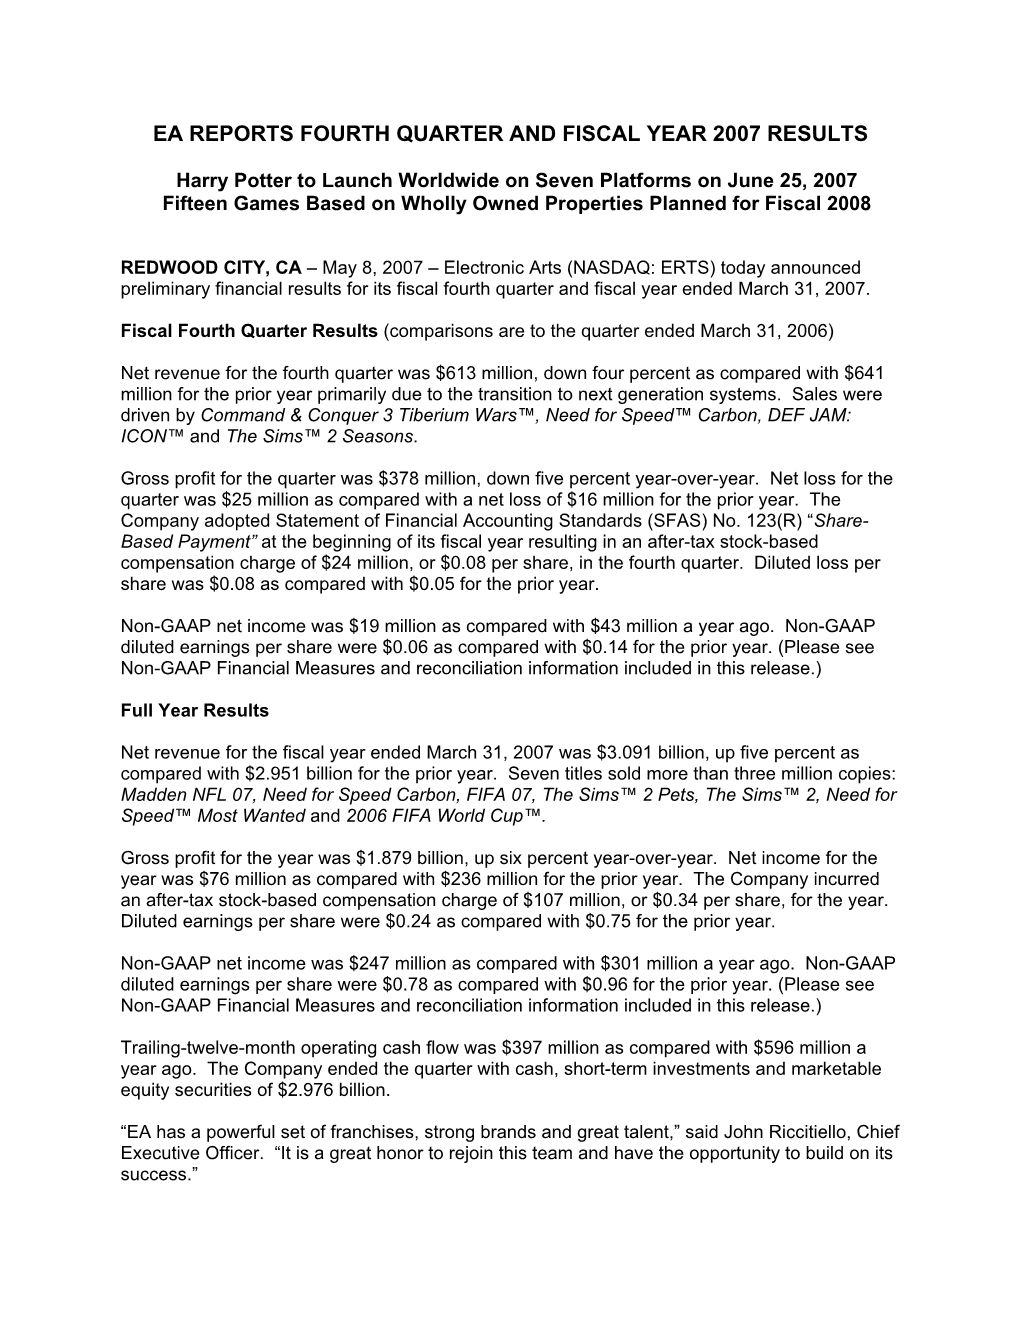 Ea Reports Fourth Quarter and Fiscal Year 2007 Results